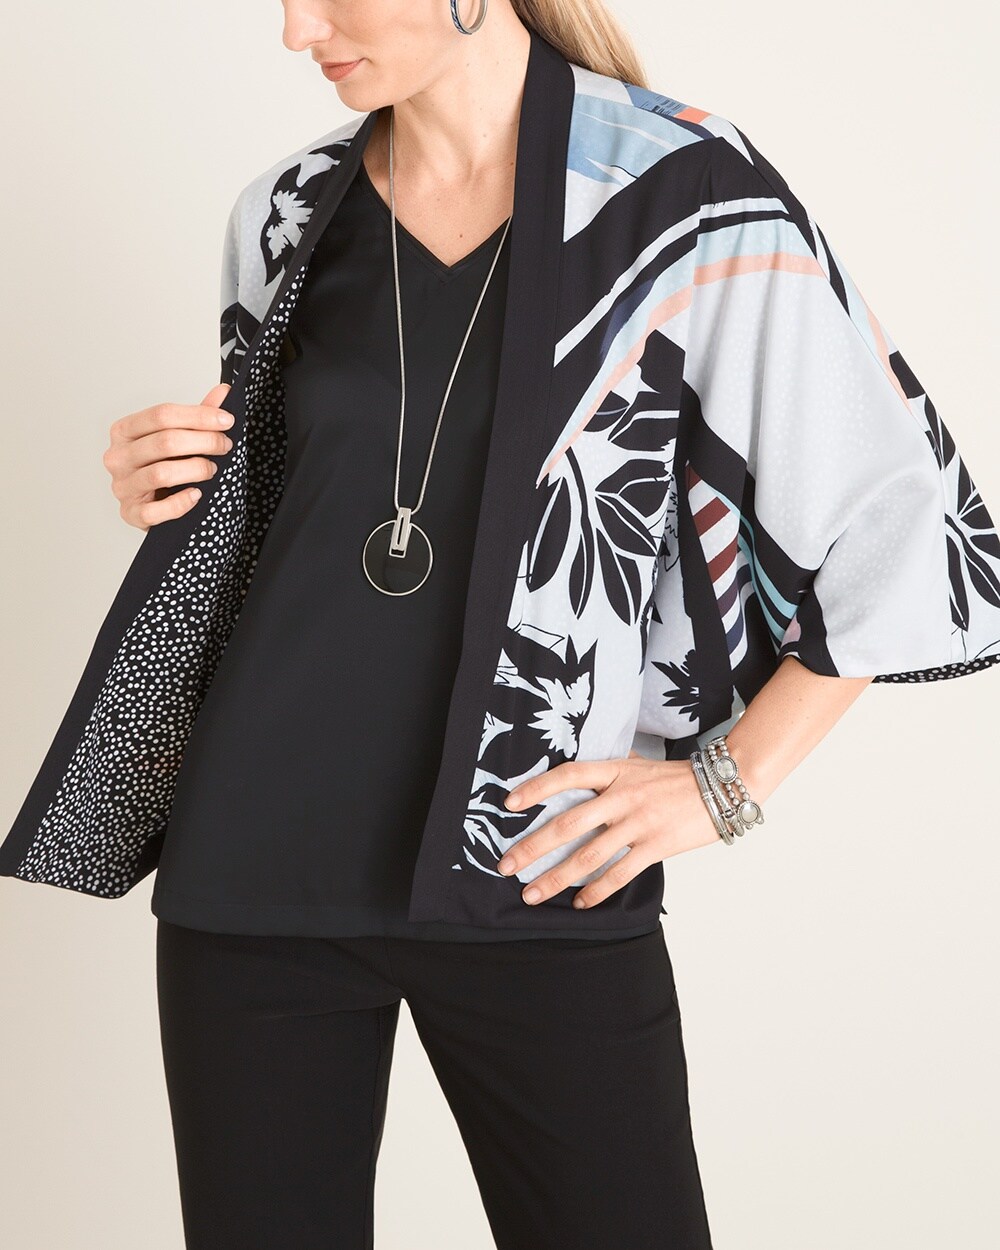 Reversible Dot to Abstract Floral Cocoon Ruana Wrap